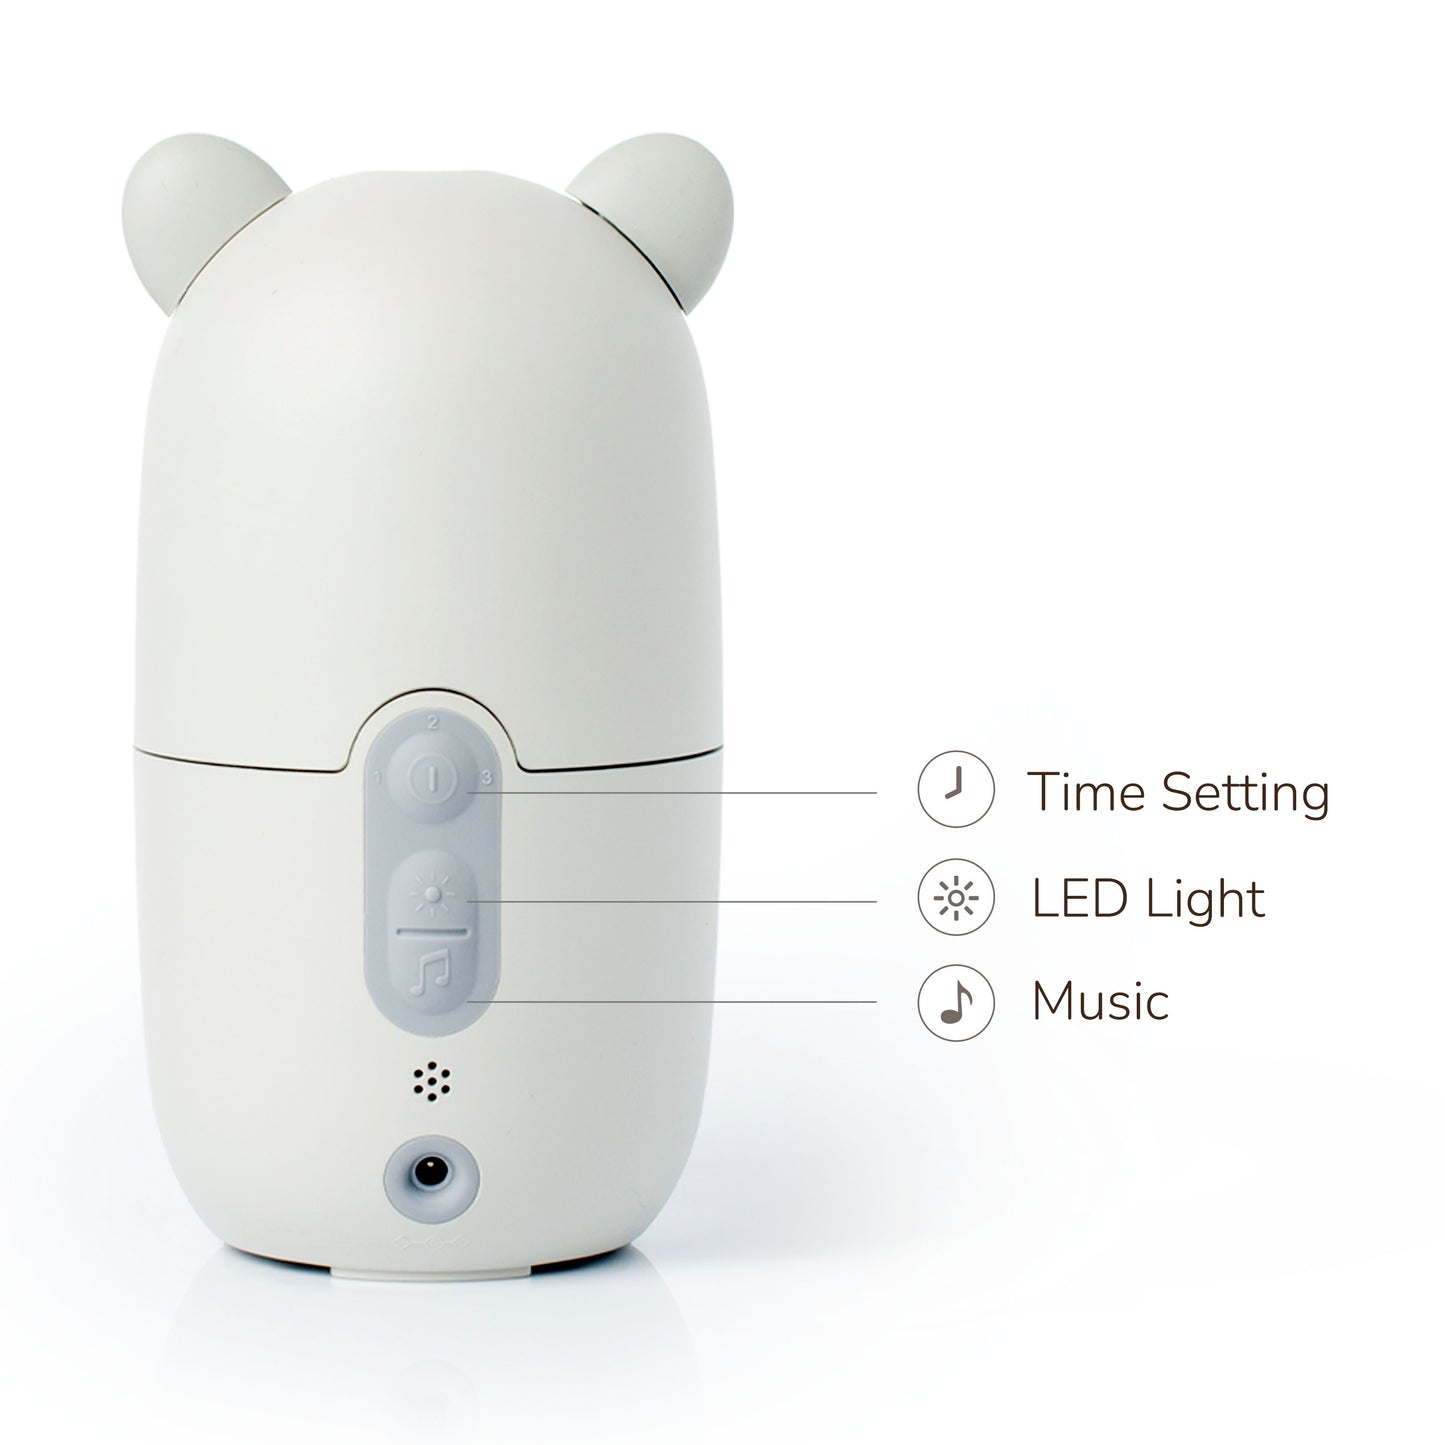 Forest Friend Diffuser with Sticker Sheet